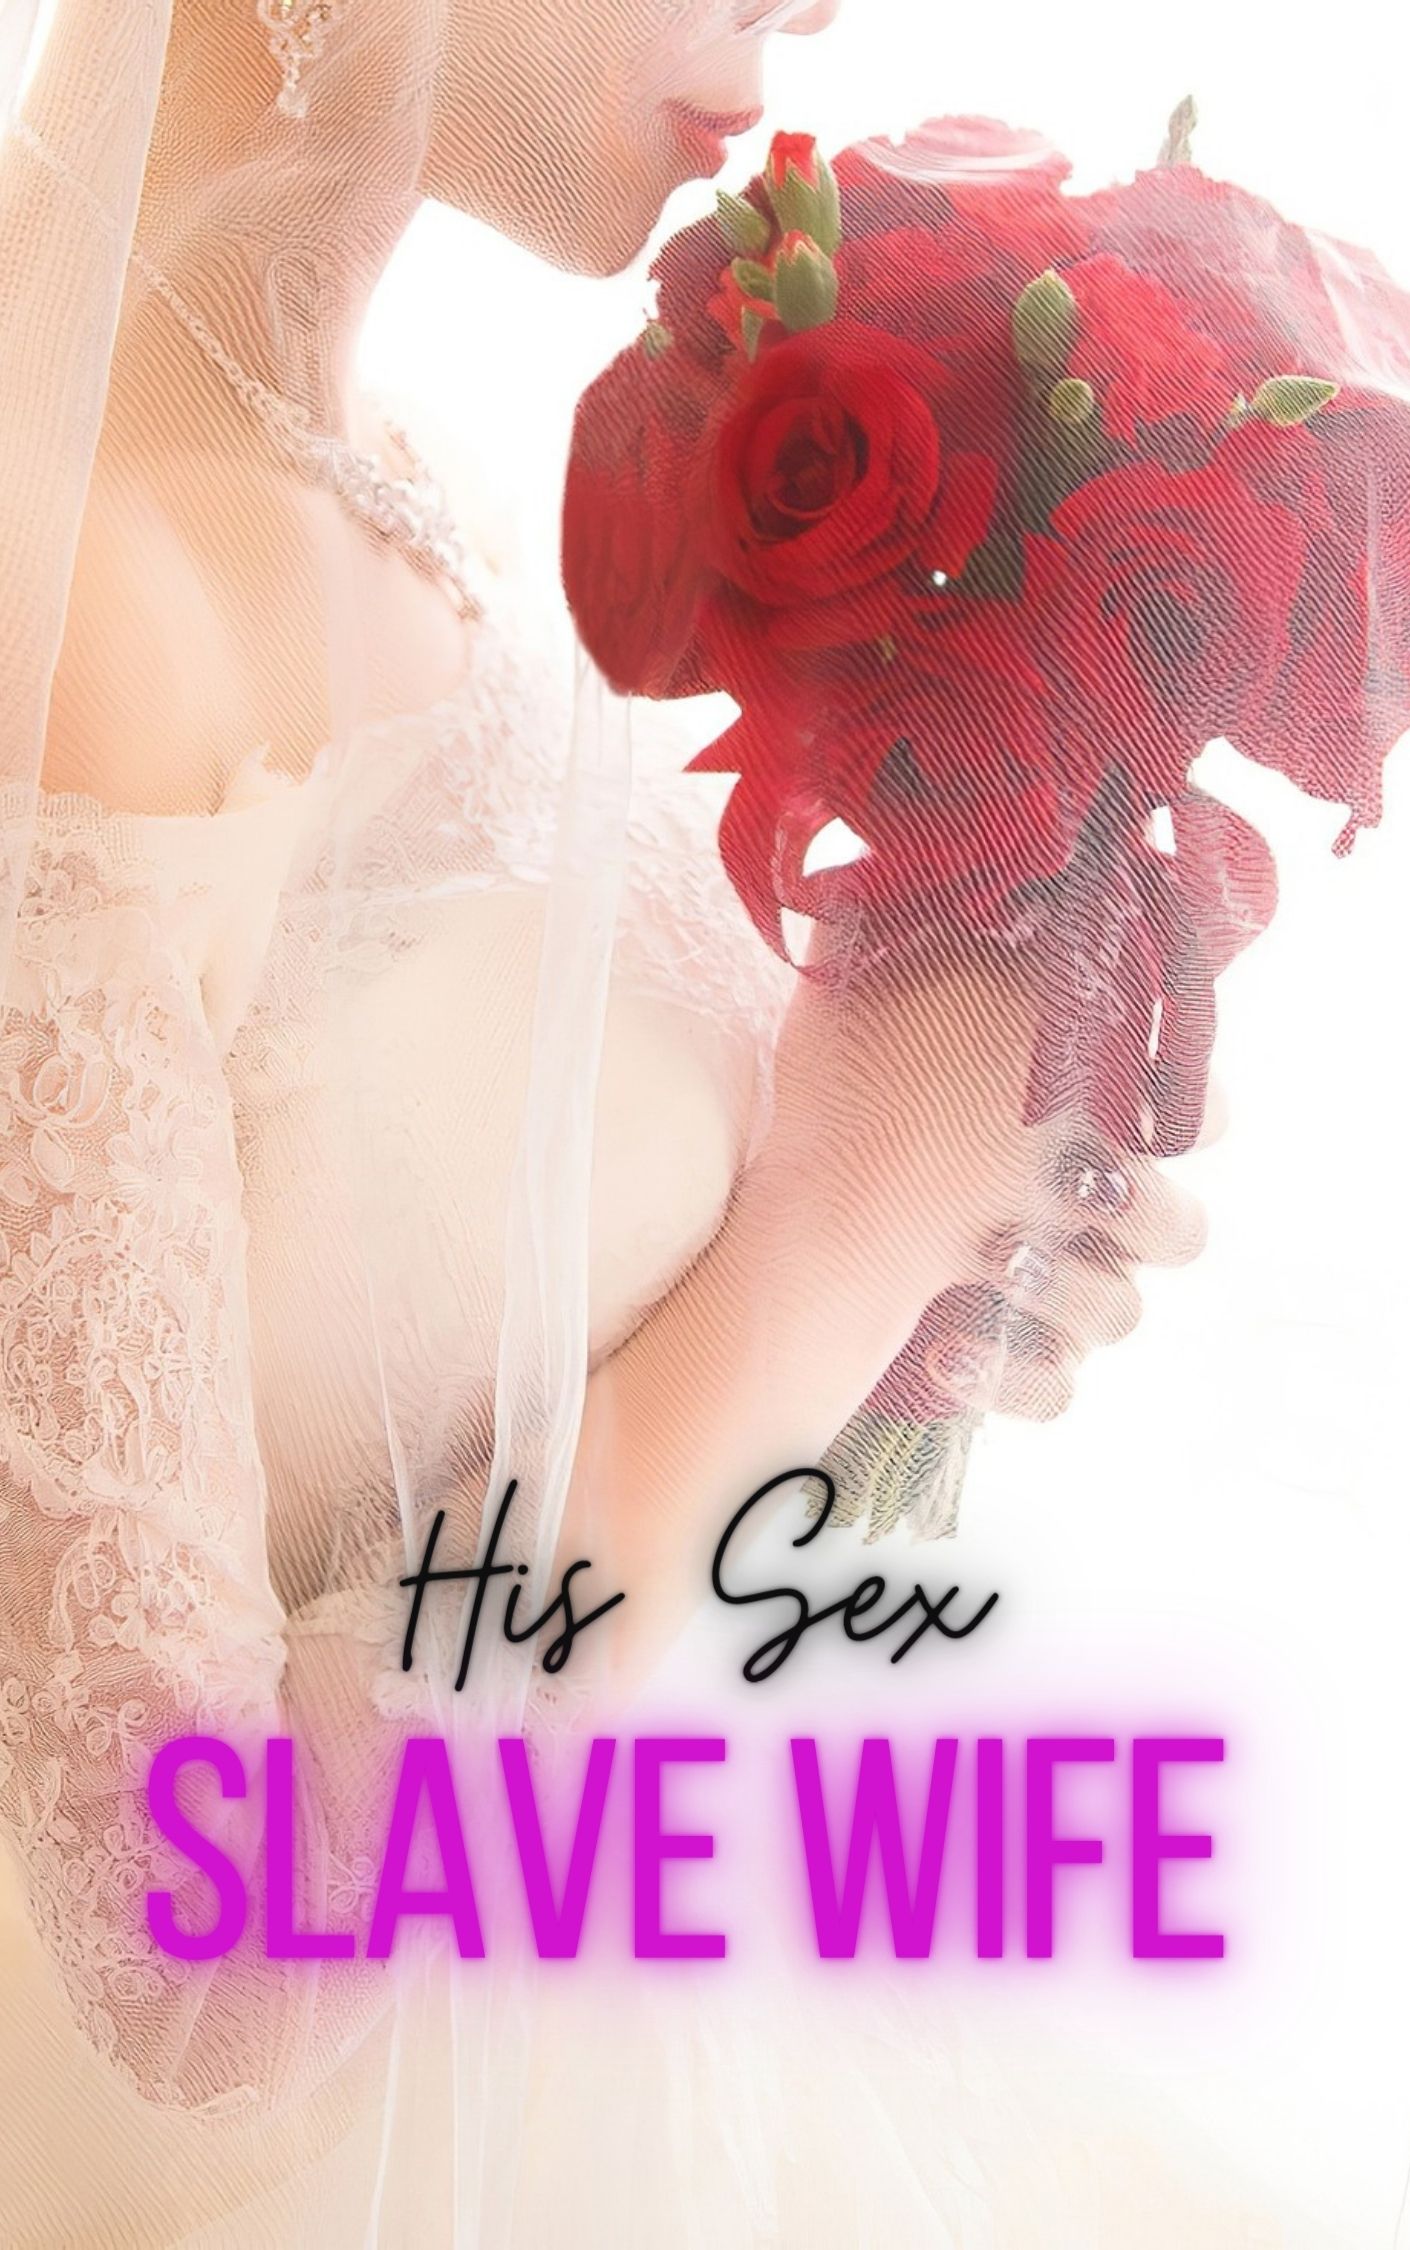 His Sex Slave Wife Novel Full Story Book image picture